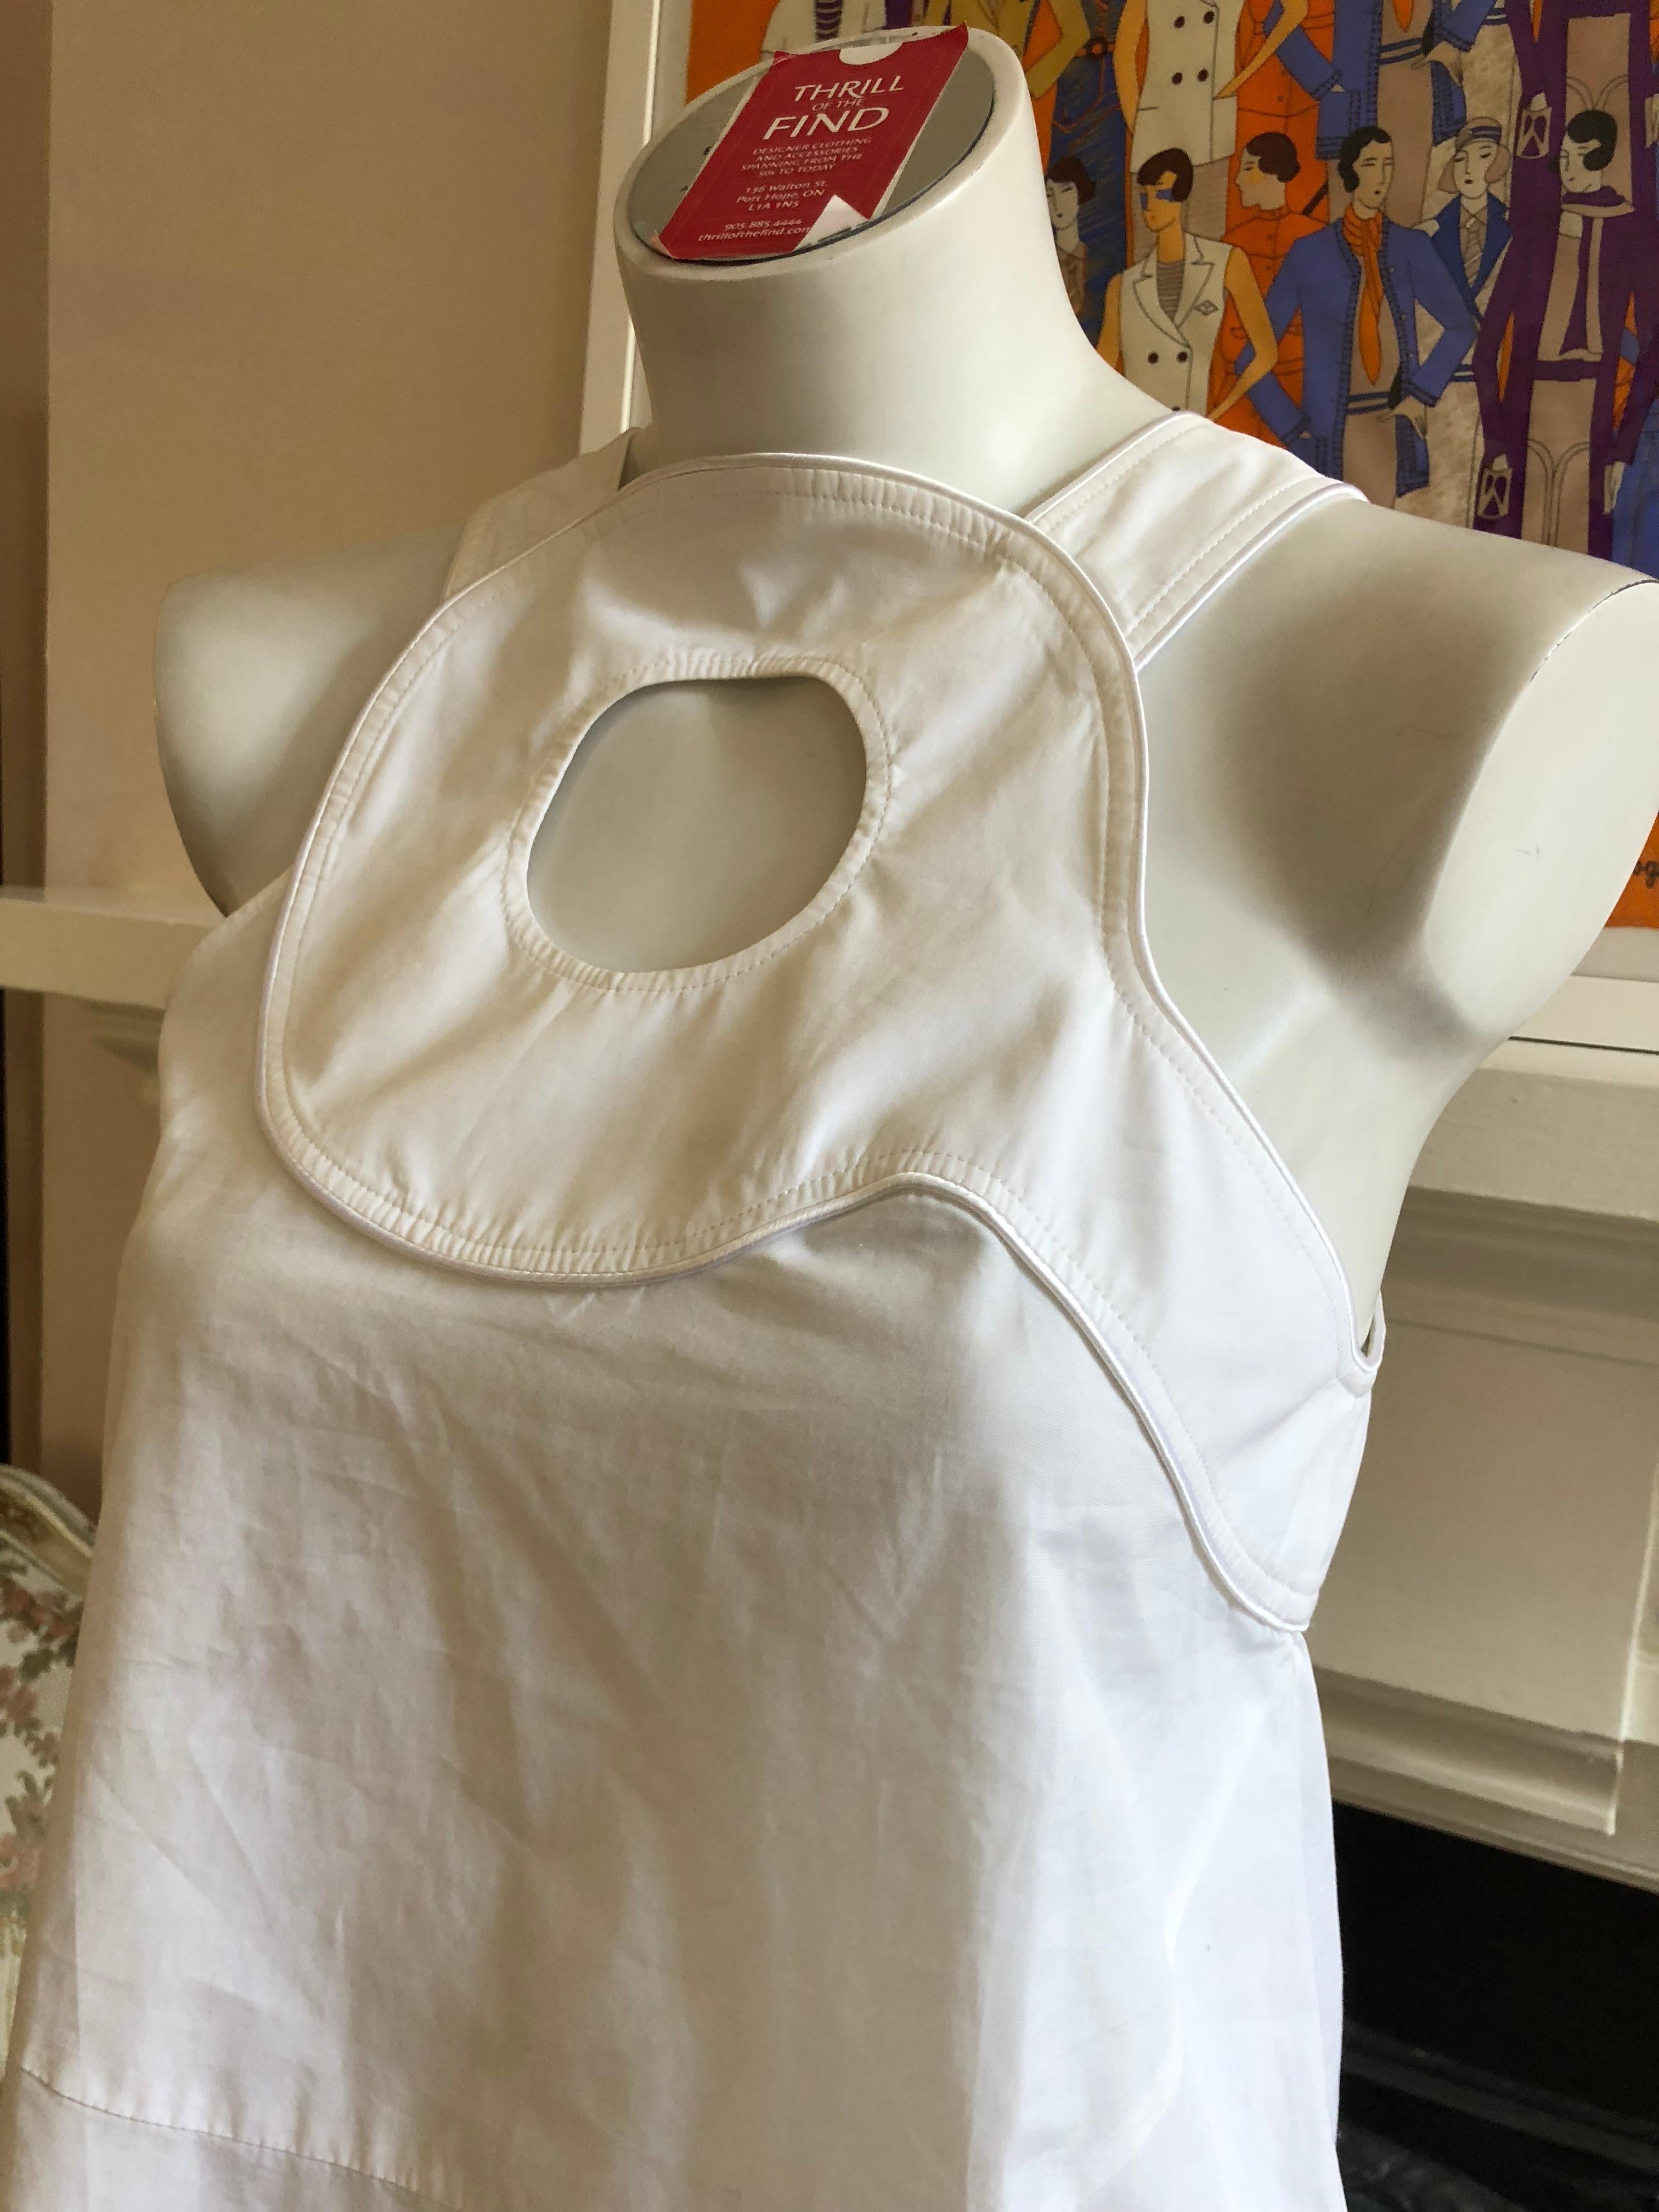 Made in Italy this is a fine cotton sleeveless blouse with a circular keyhole design at the front.